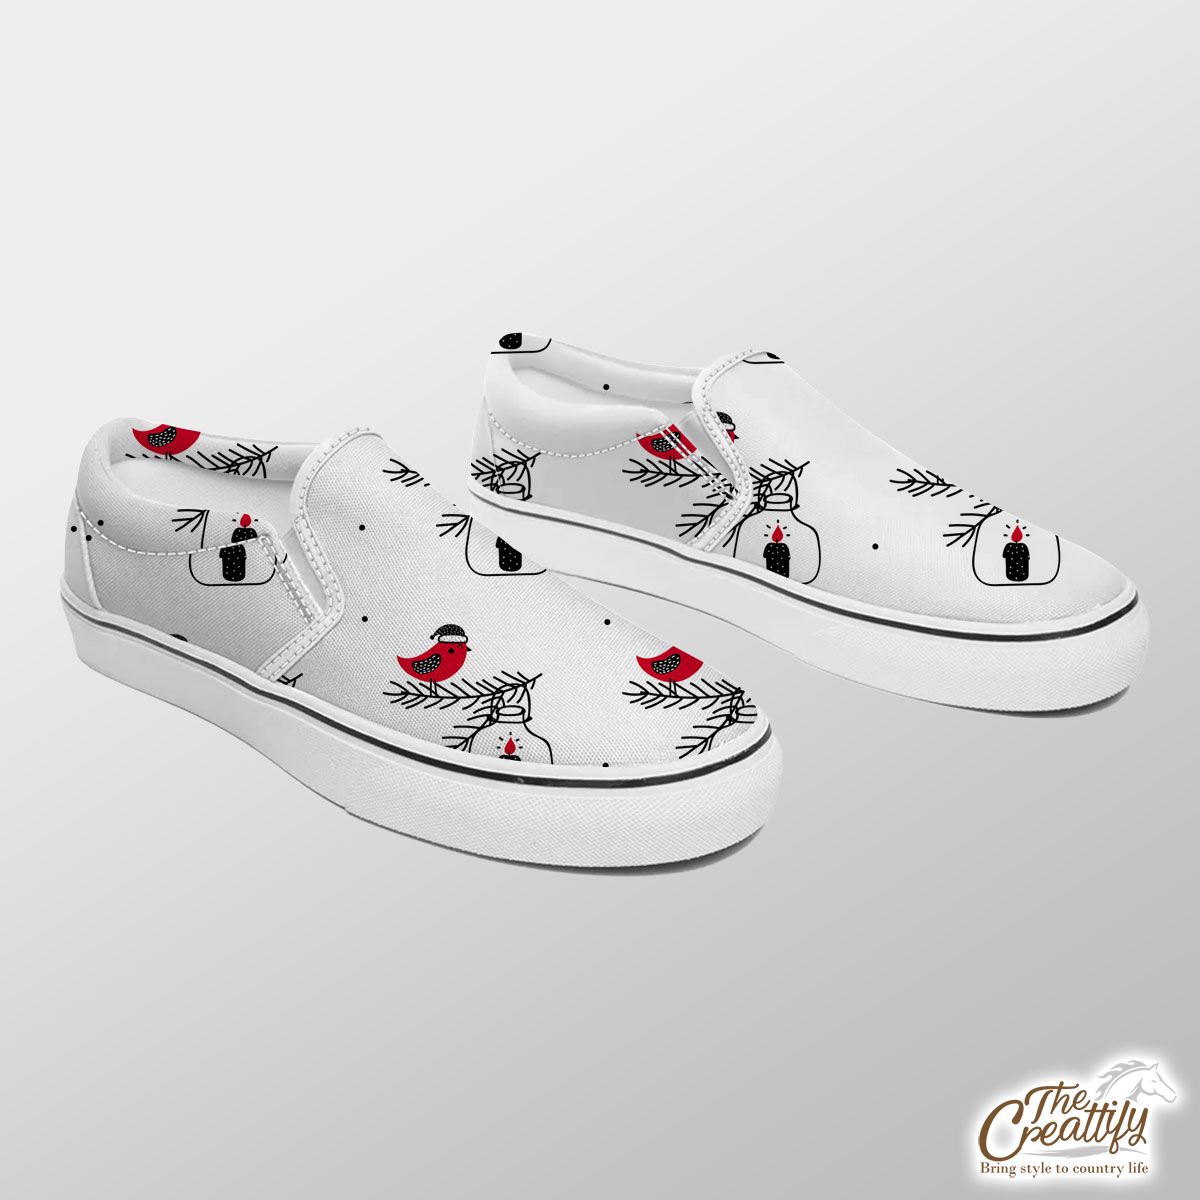 Cardinal Bird With Santa Hat, Christmas Candles Seamless White Pattern Slip On Sneakers